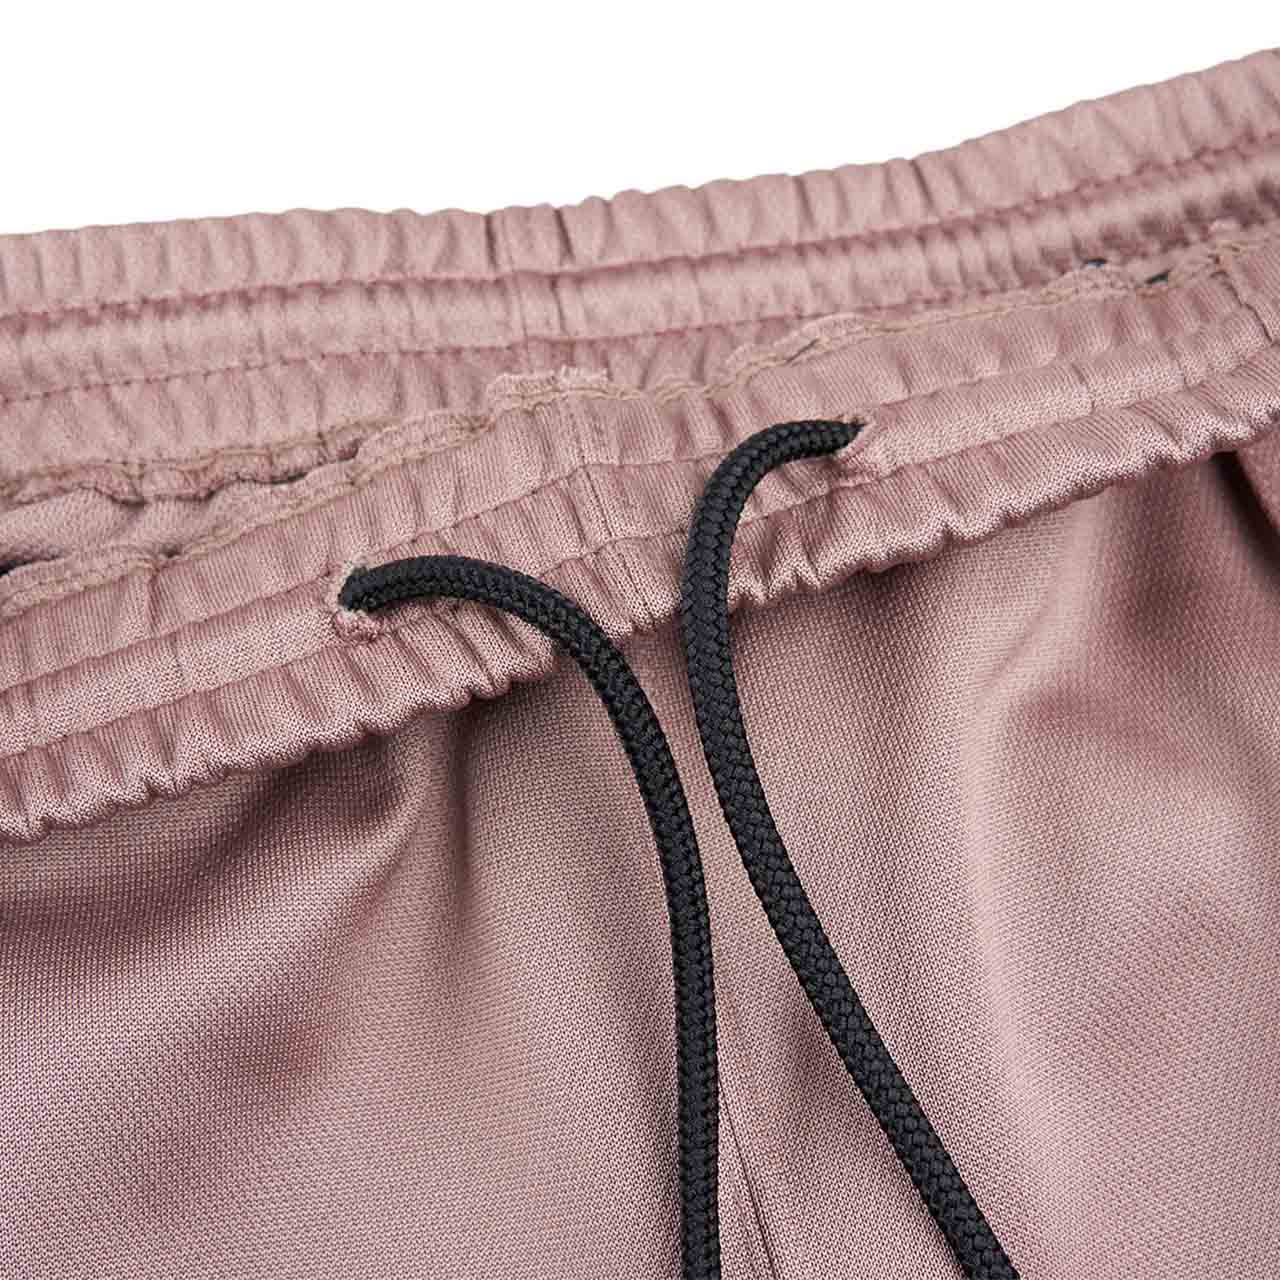 needles side stripe track pants (taupe)